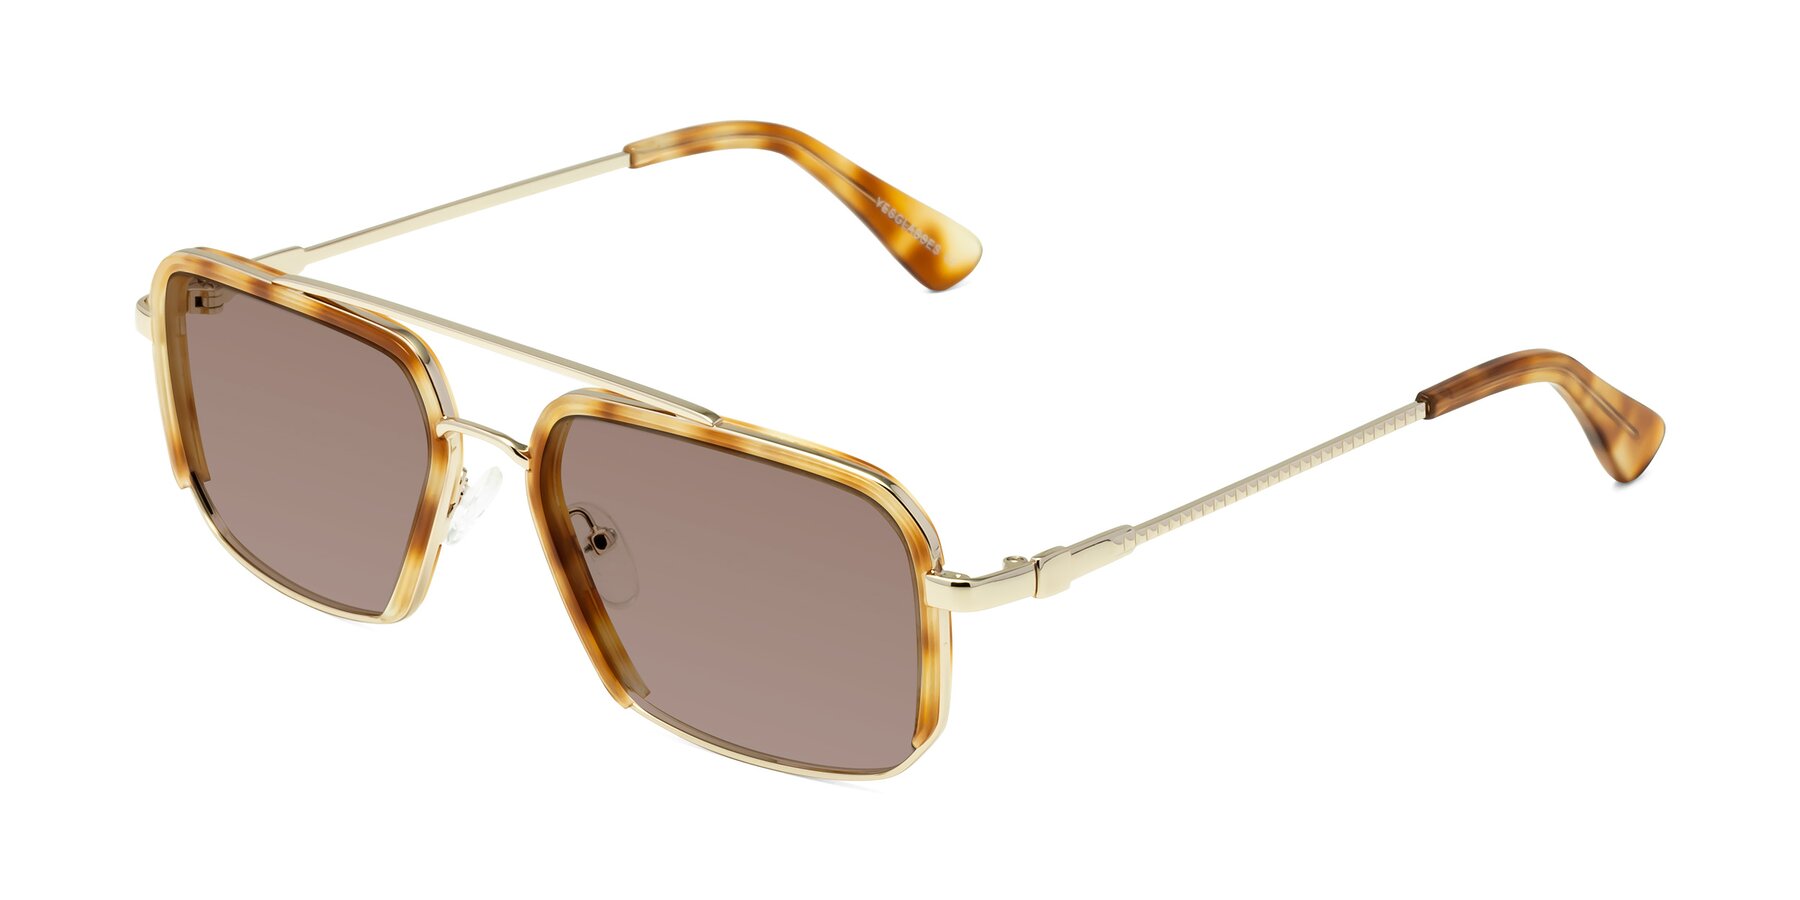 Angle of Dechter in Yellow Tortoise-Gold with Medium Brown Tinted Lenses